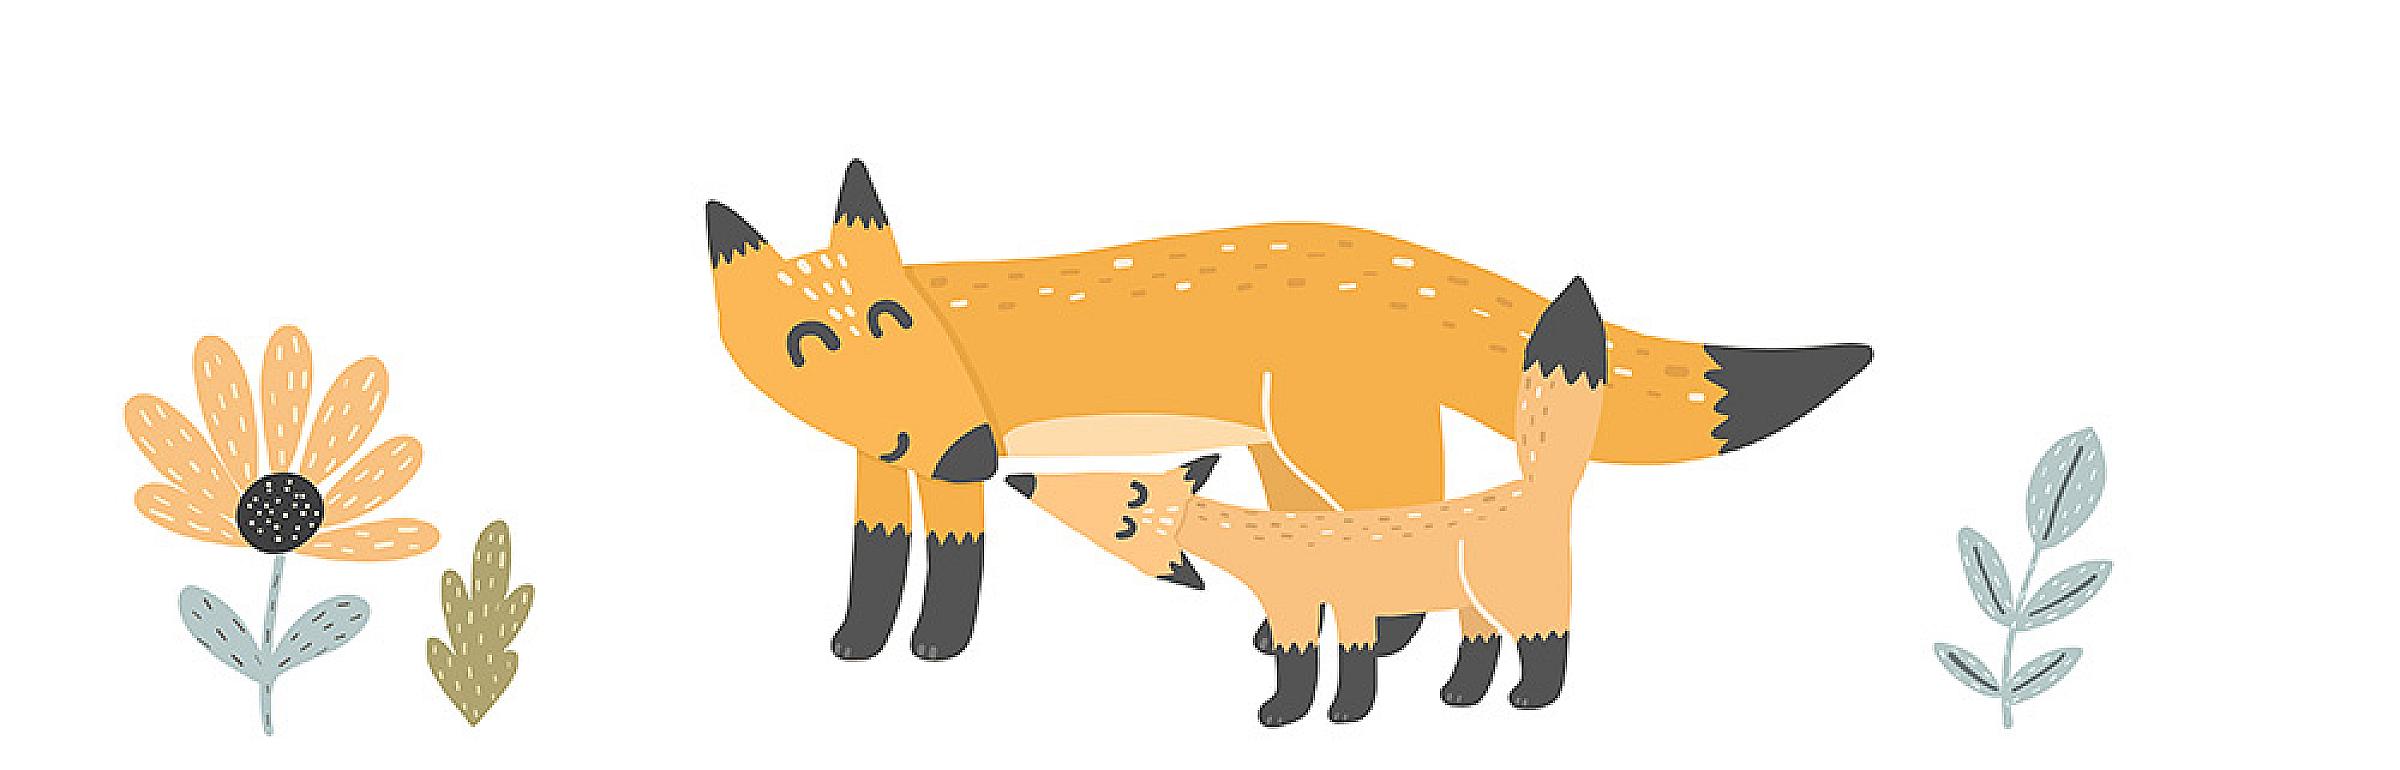 Stylized illustration of a fox parent and child